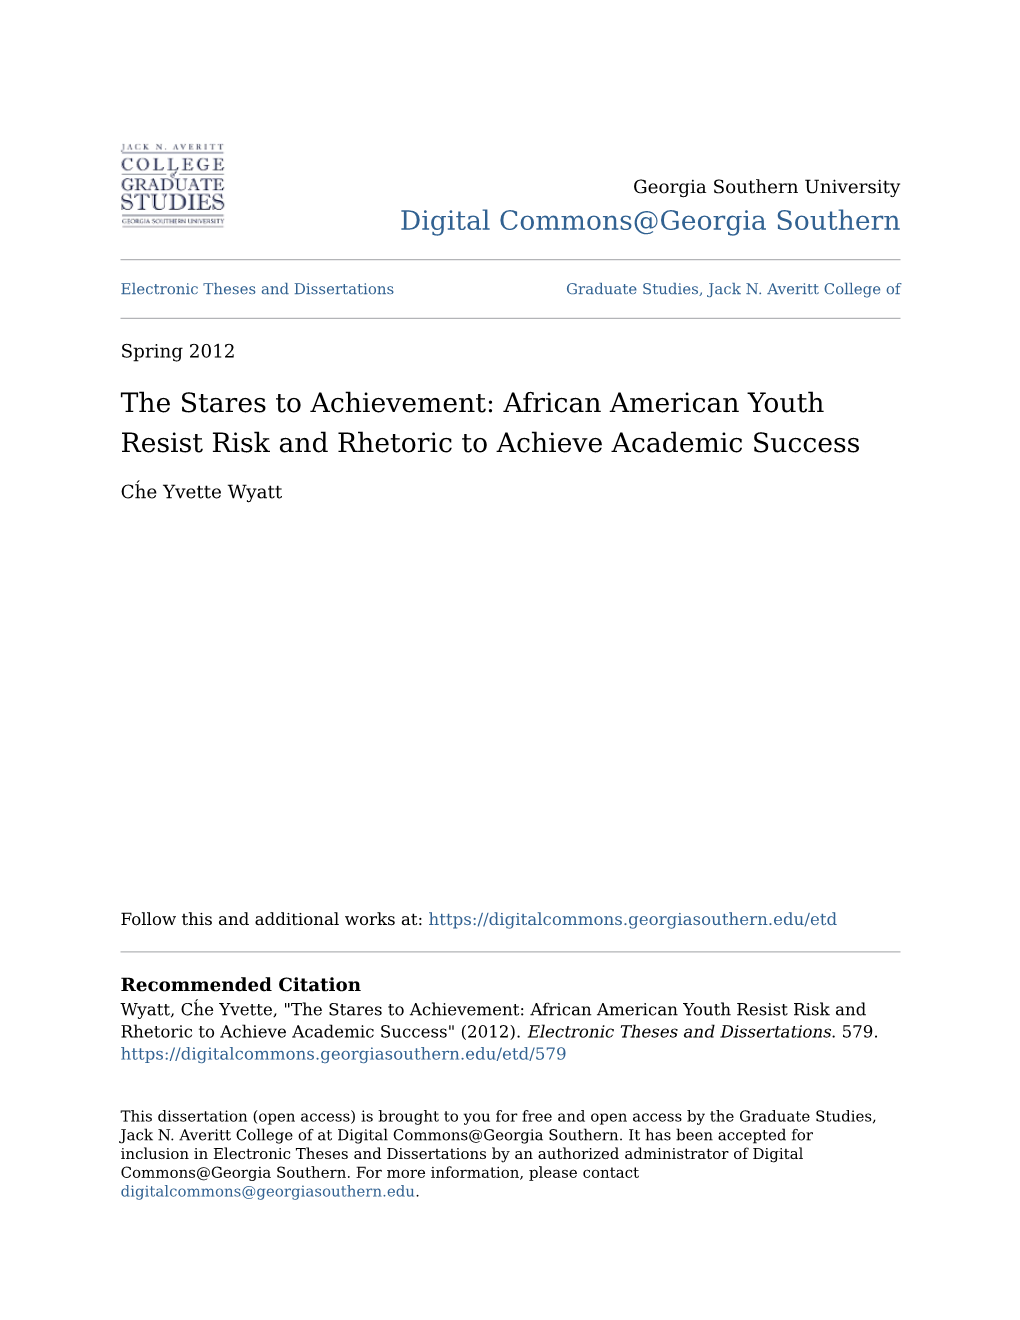 The Stares to Achievement: African American Youth Resist Risk and Rhetoric to Achieve Academic Success